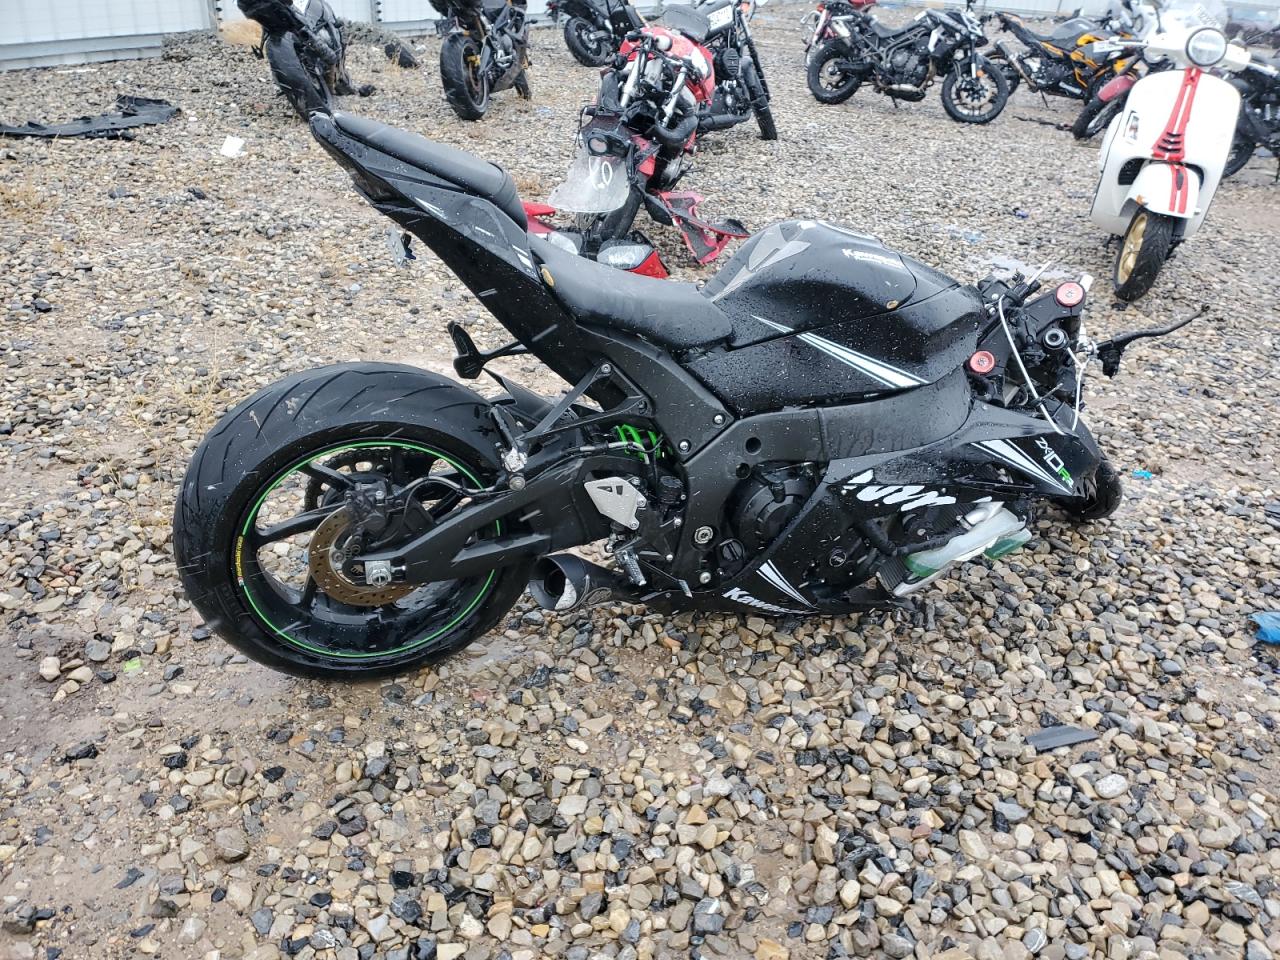 2017 Kawasaki ZX1000 Z for sale at Copart Magna, UT. Lot #36957 